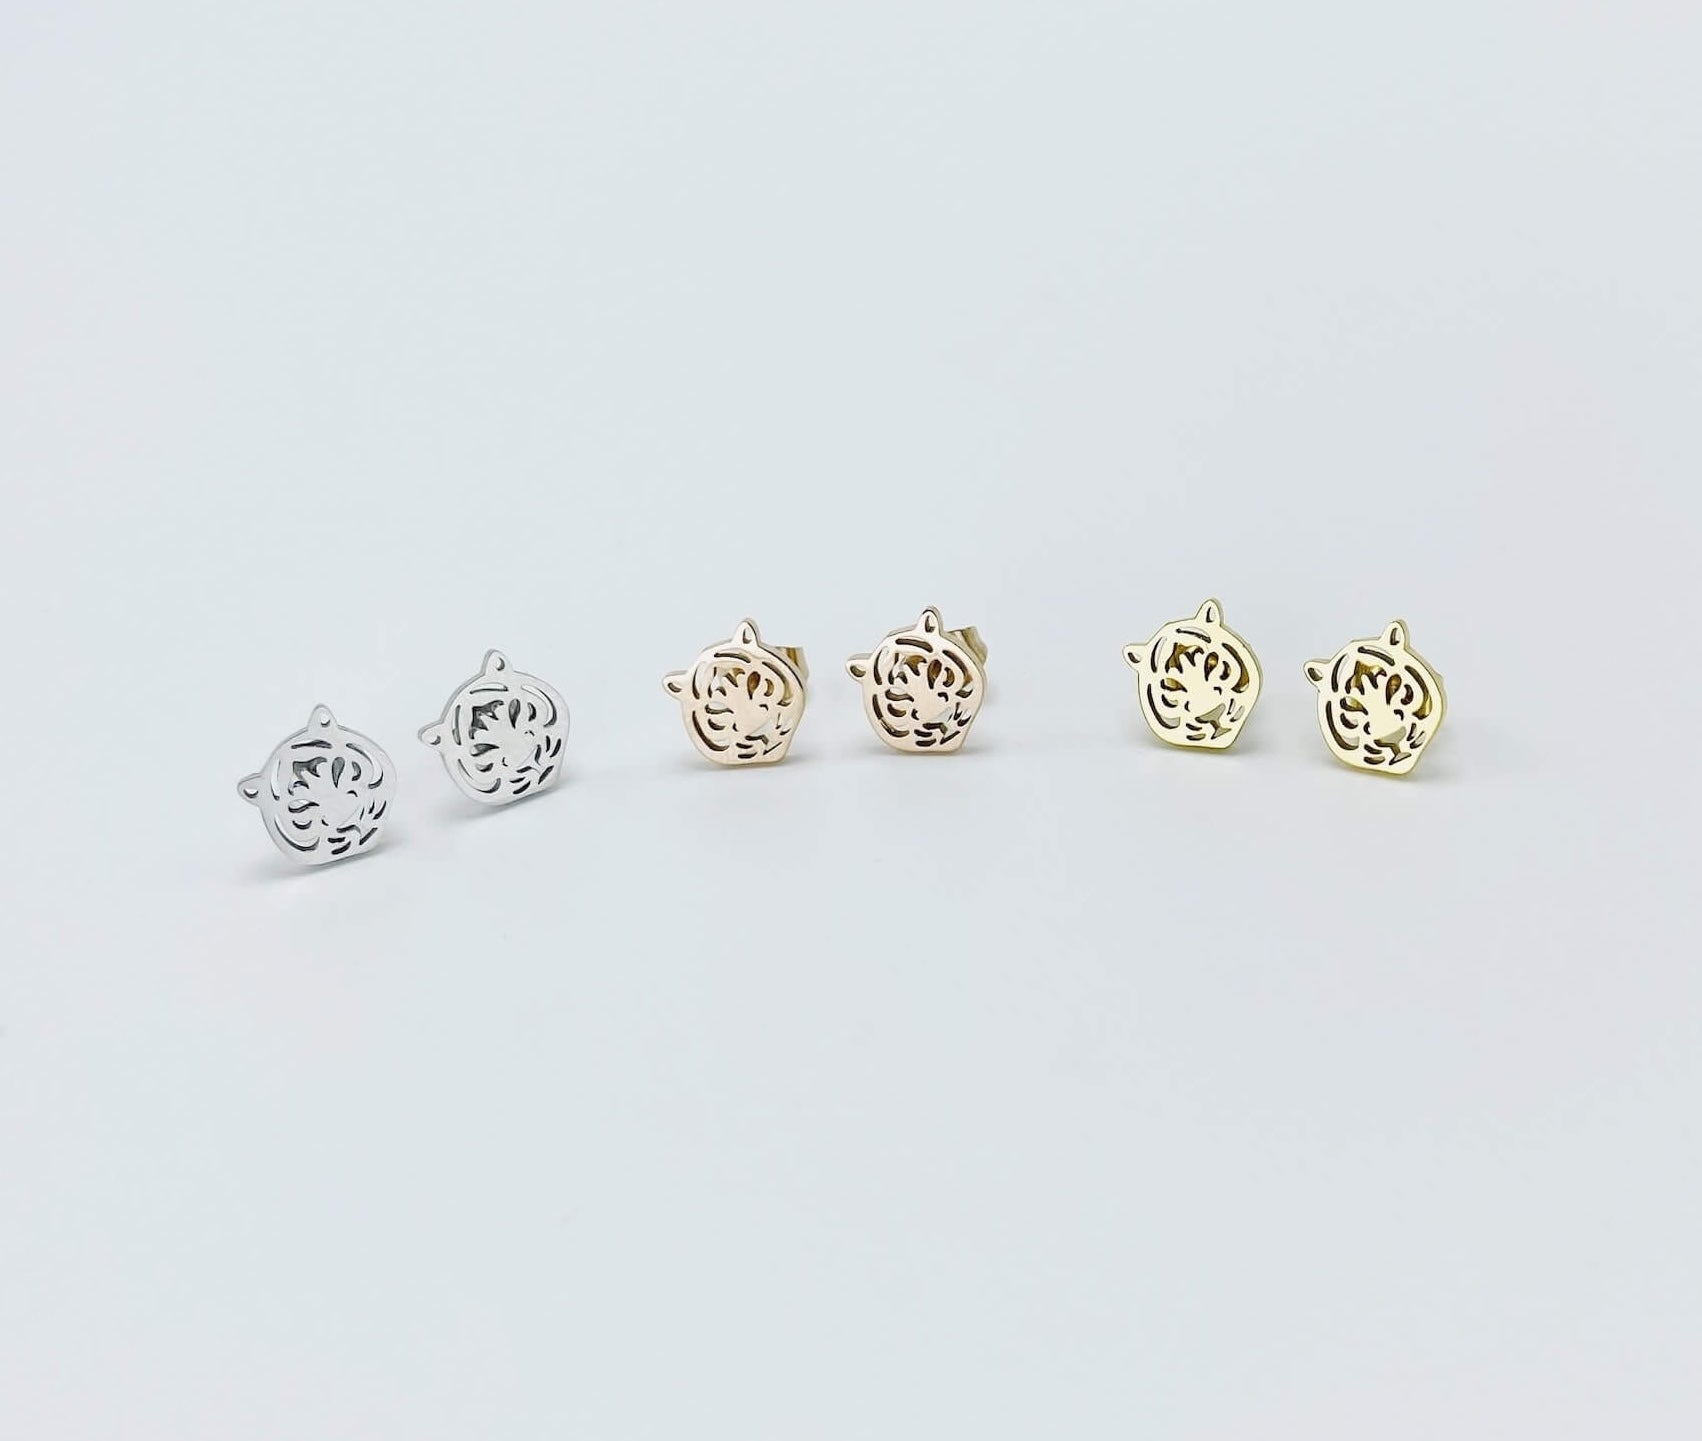 Metallic tiger stud earrings made from stainless steel. Colors shown: silver, rose gold and yellow gold.